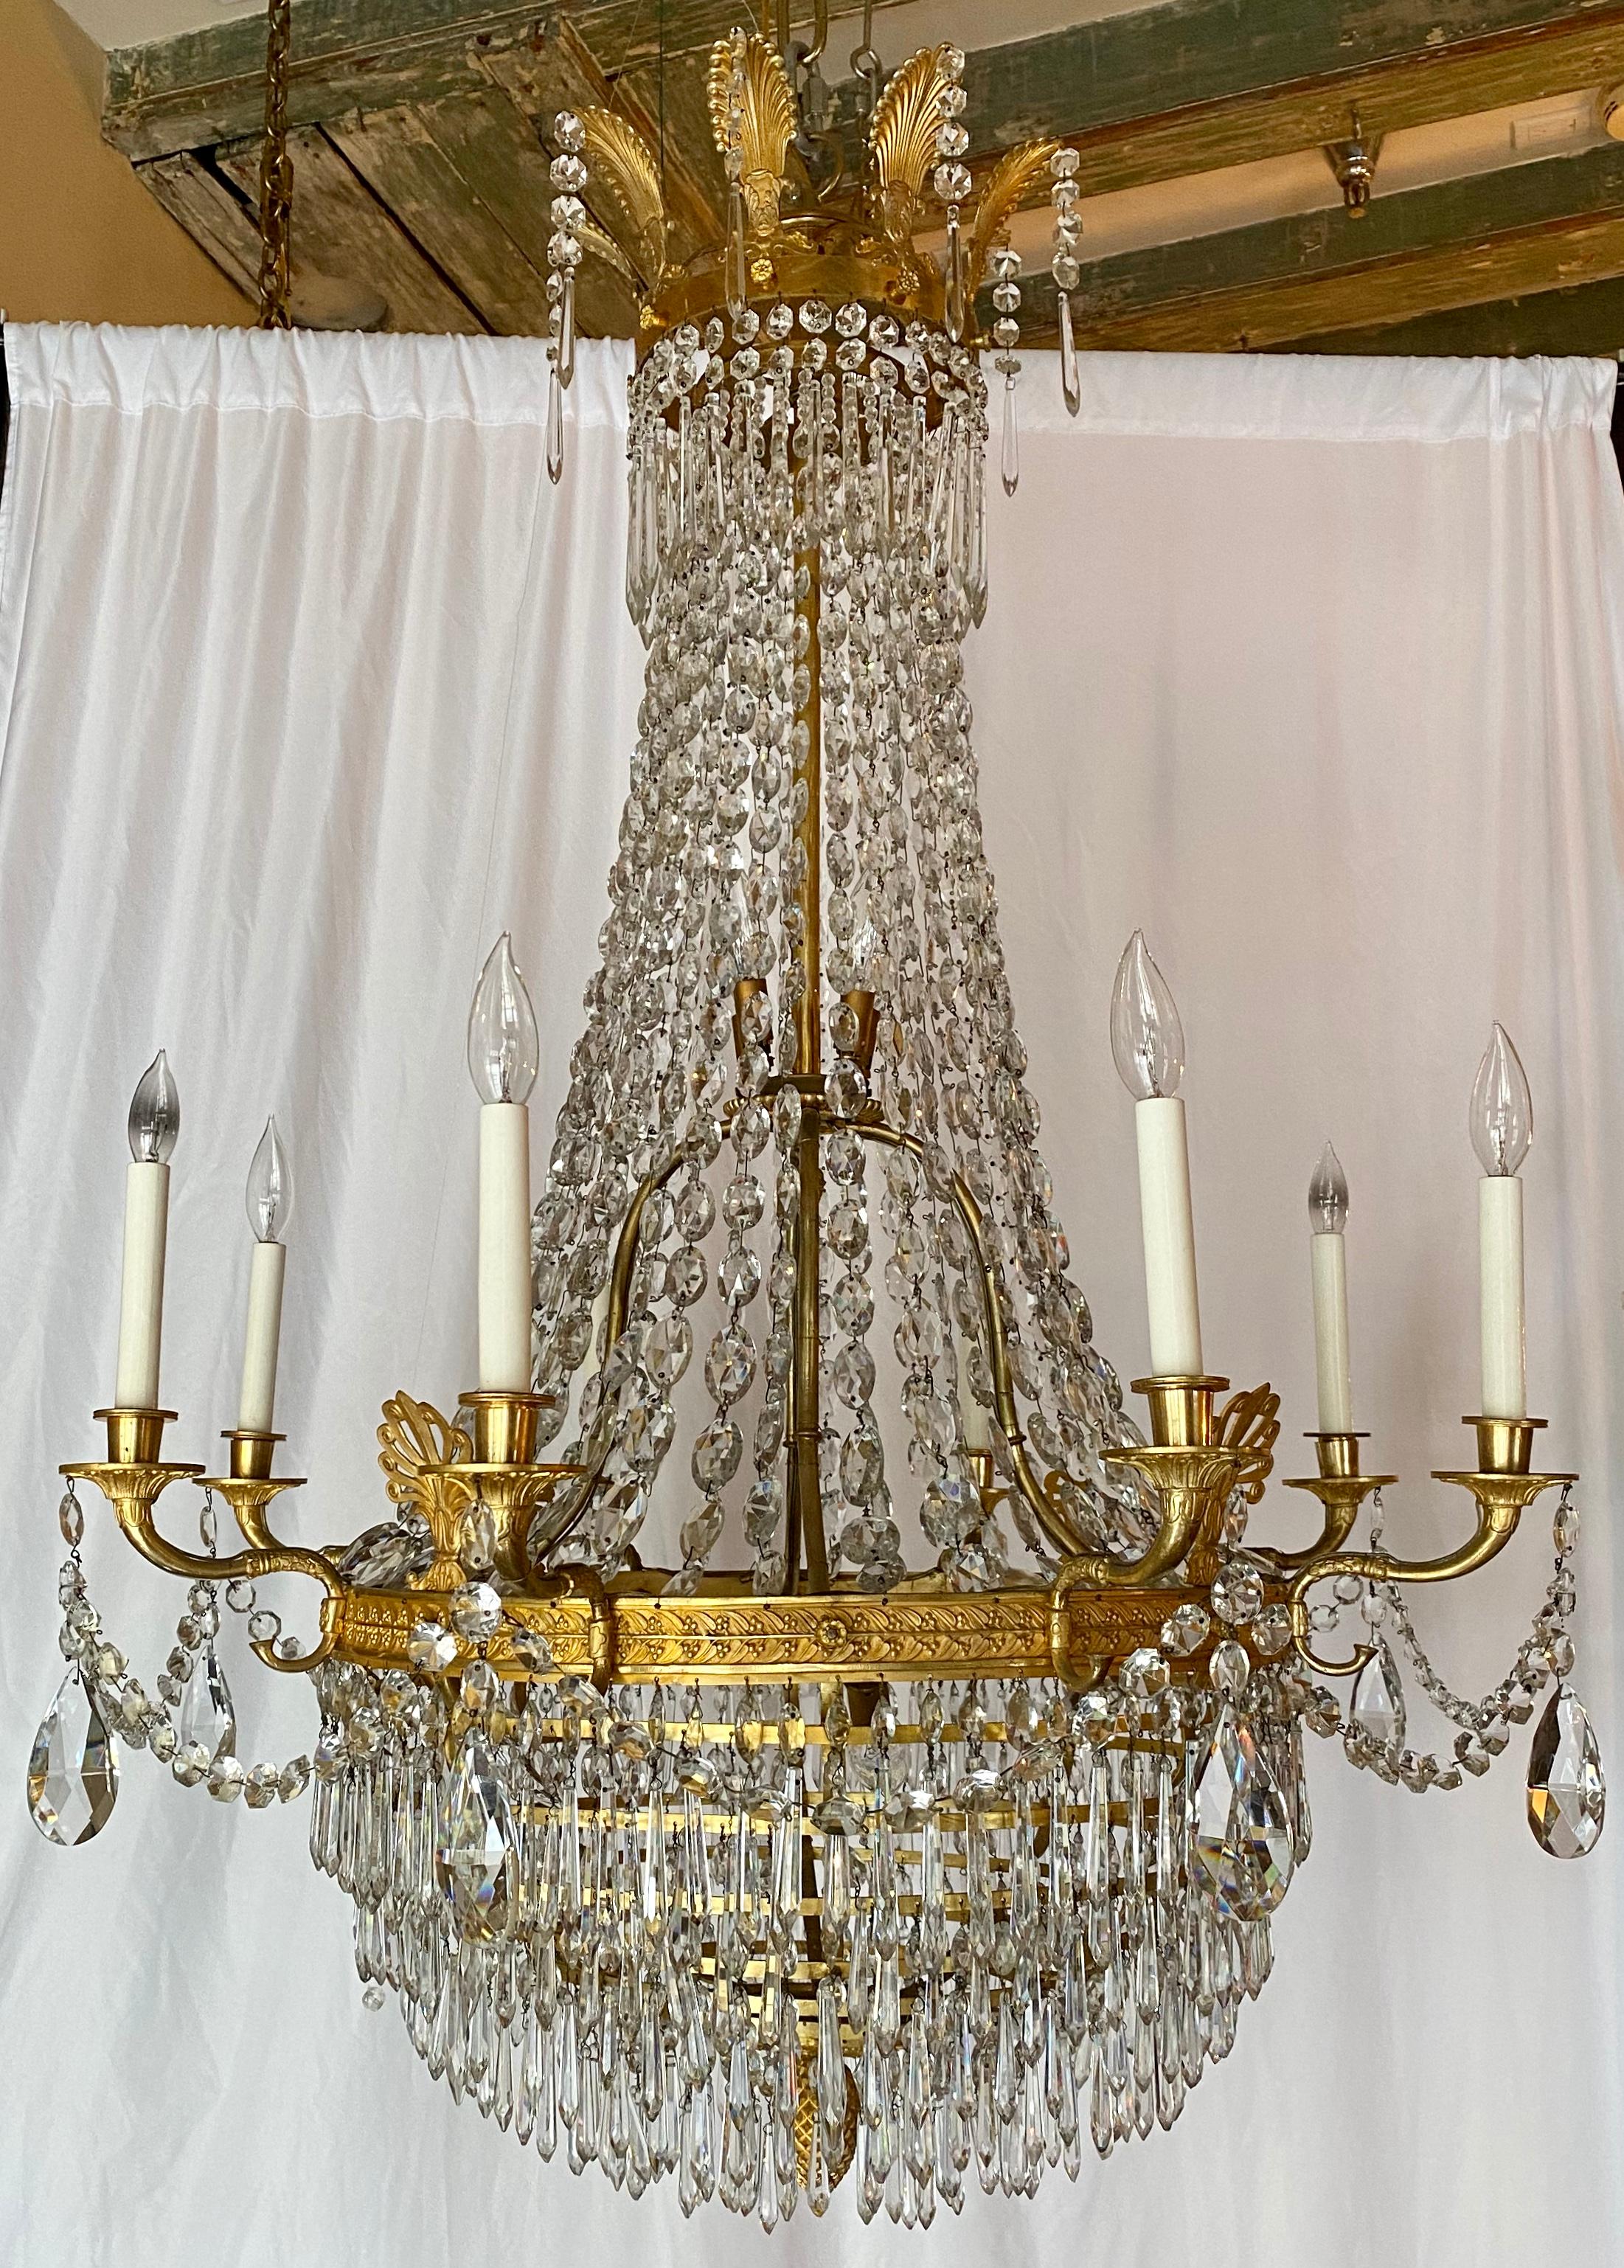 Magnificent antique French Empire fine crystal and bronze D'Ore chandelier, circa 1900.